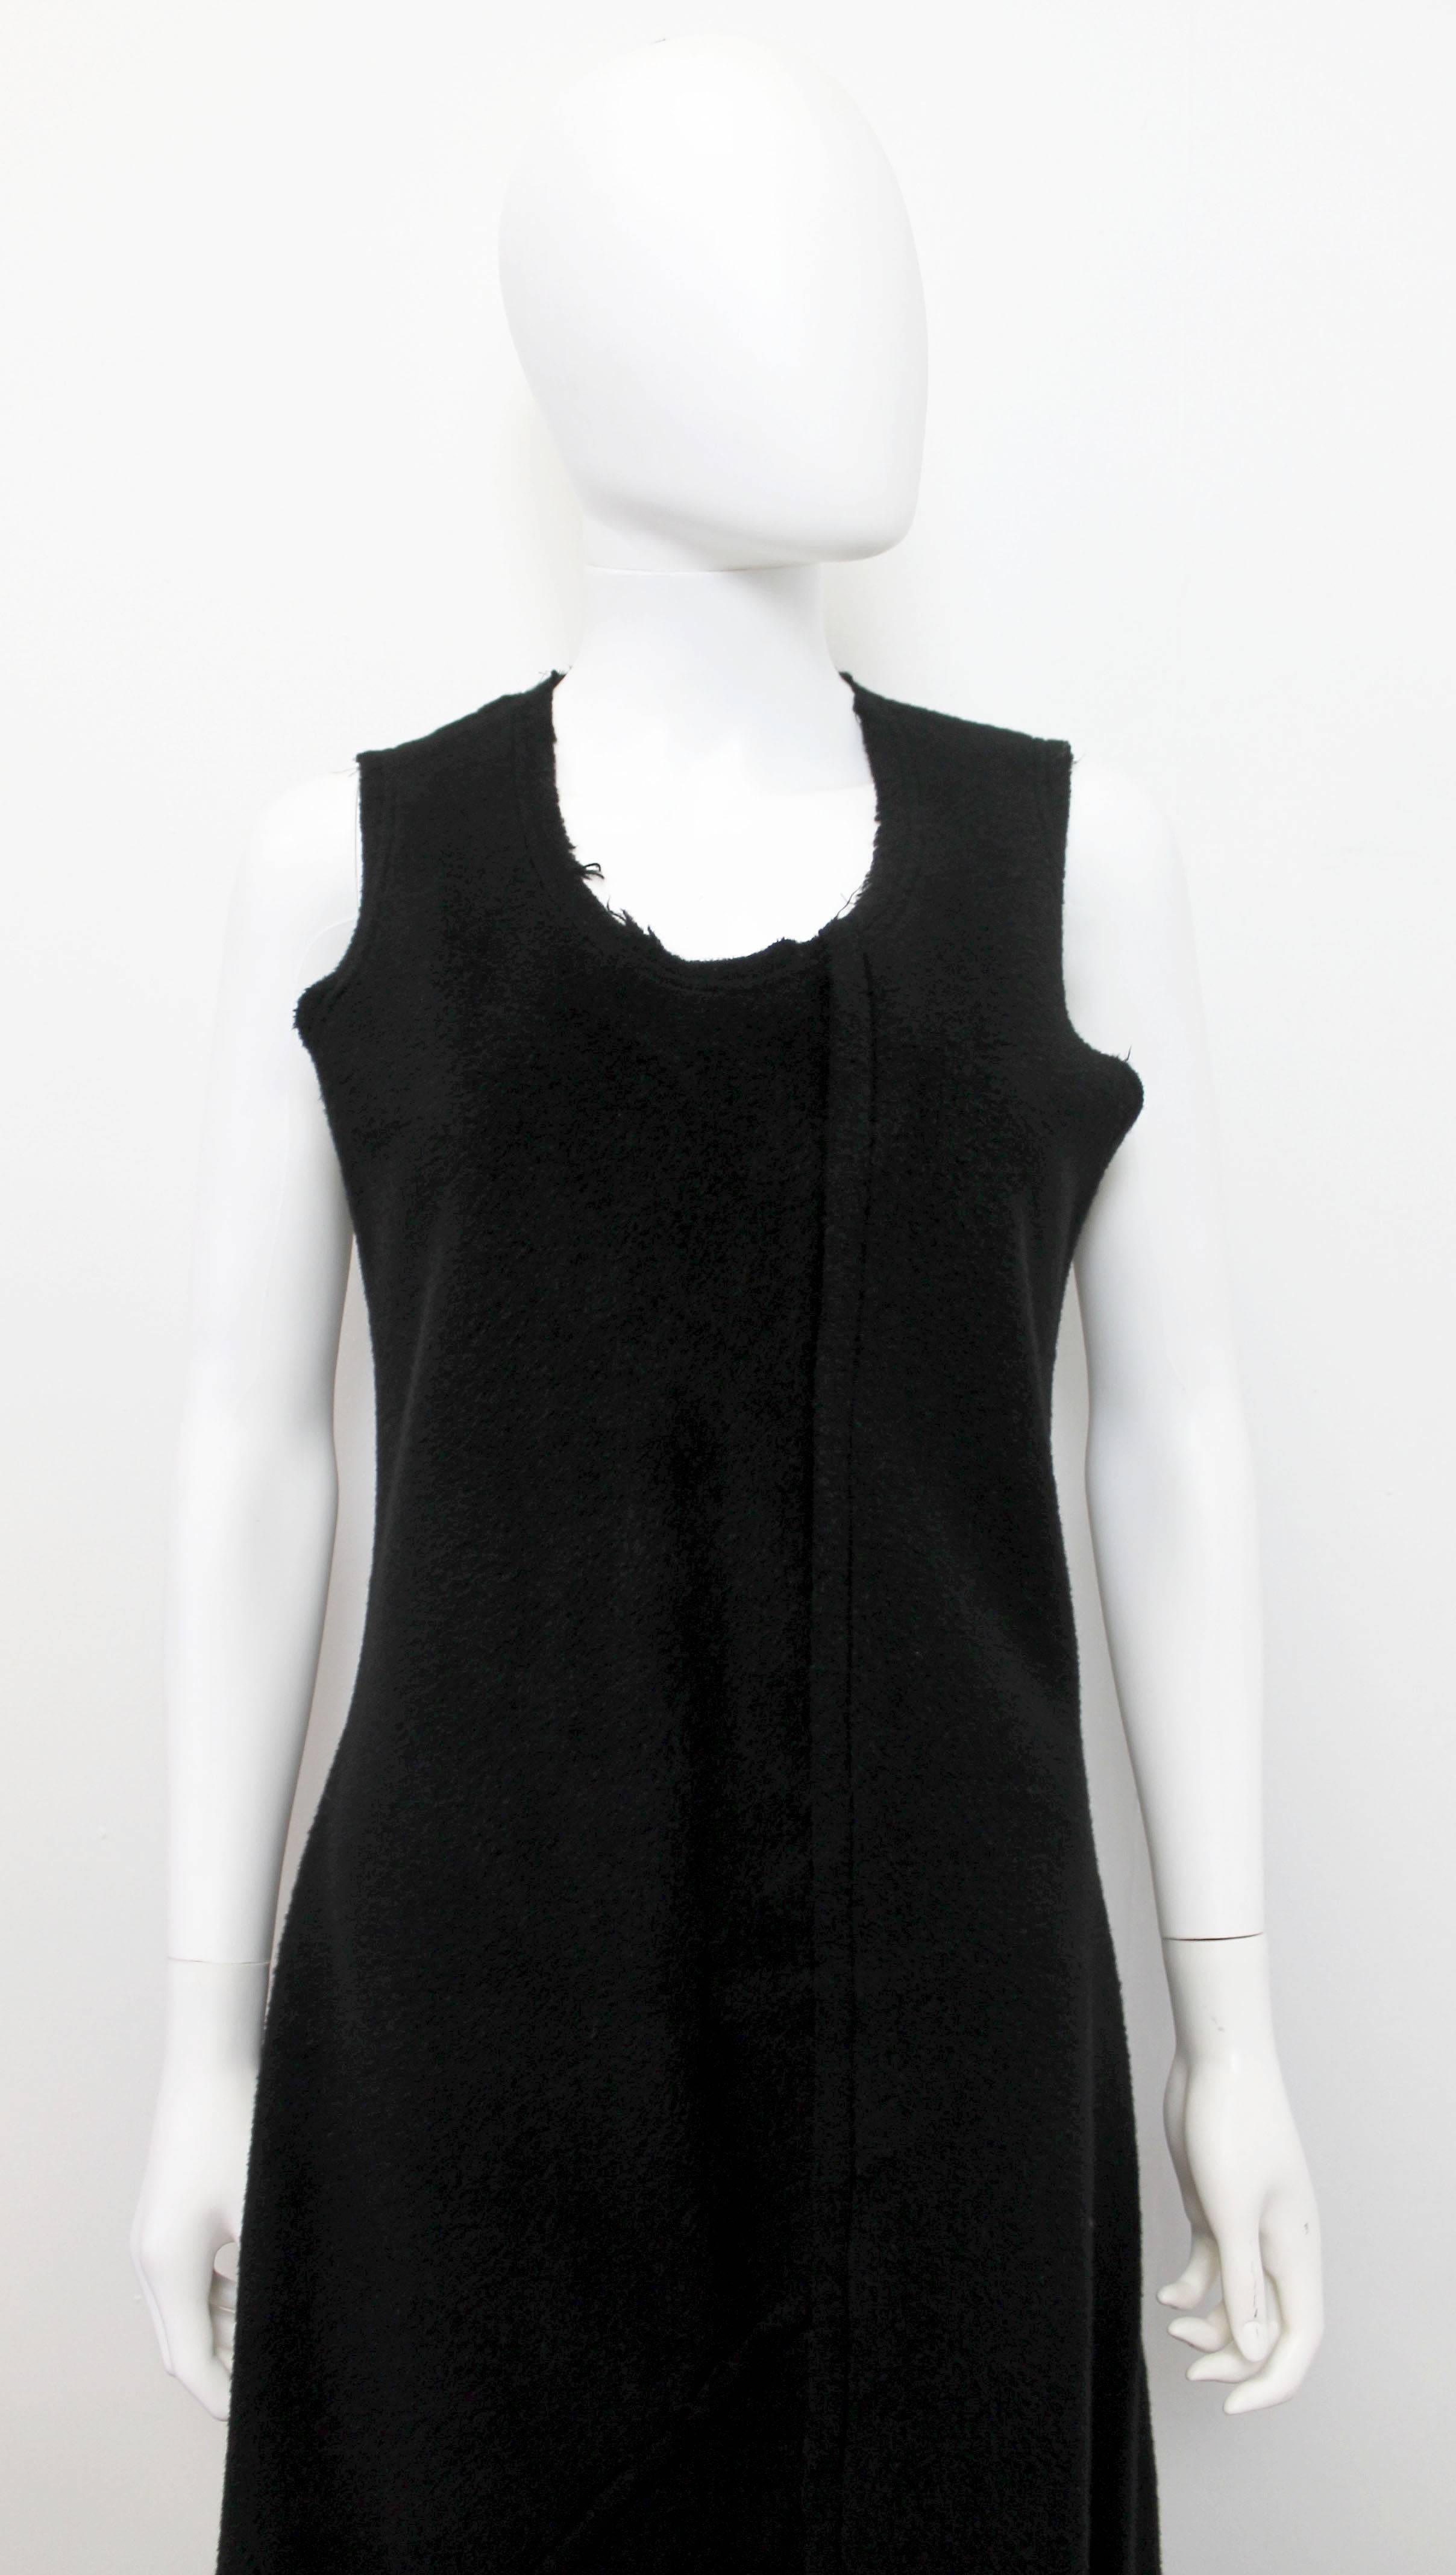 A classic piece by Comme des Garcons. c.1993

The dress features an a-symmetric cut with an a-line shaped skirt and frayed seams and neckline.

This dress is so simple and easy to wear. 